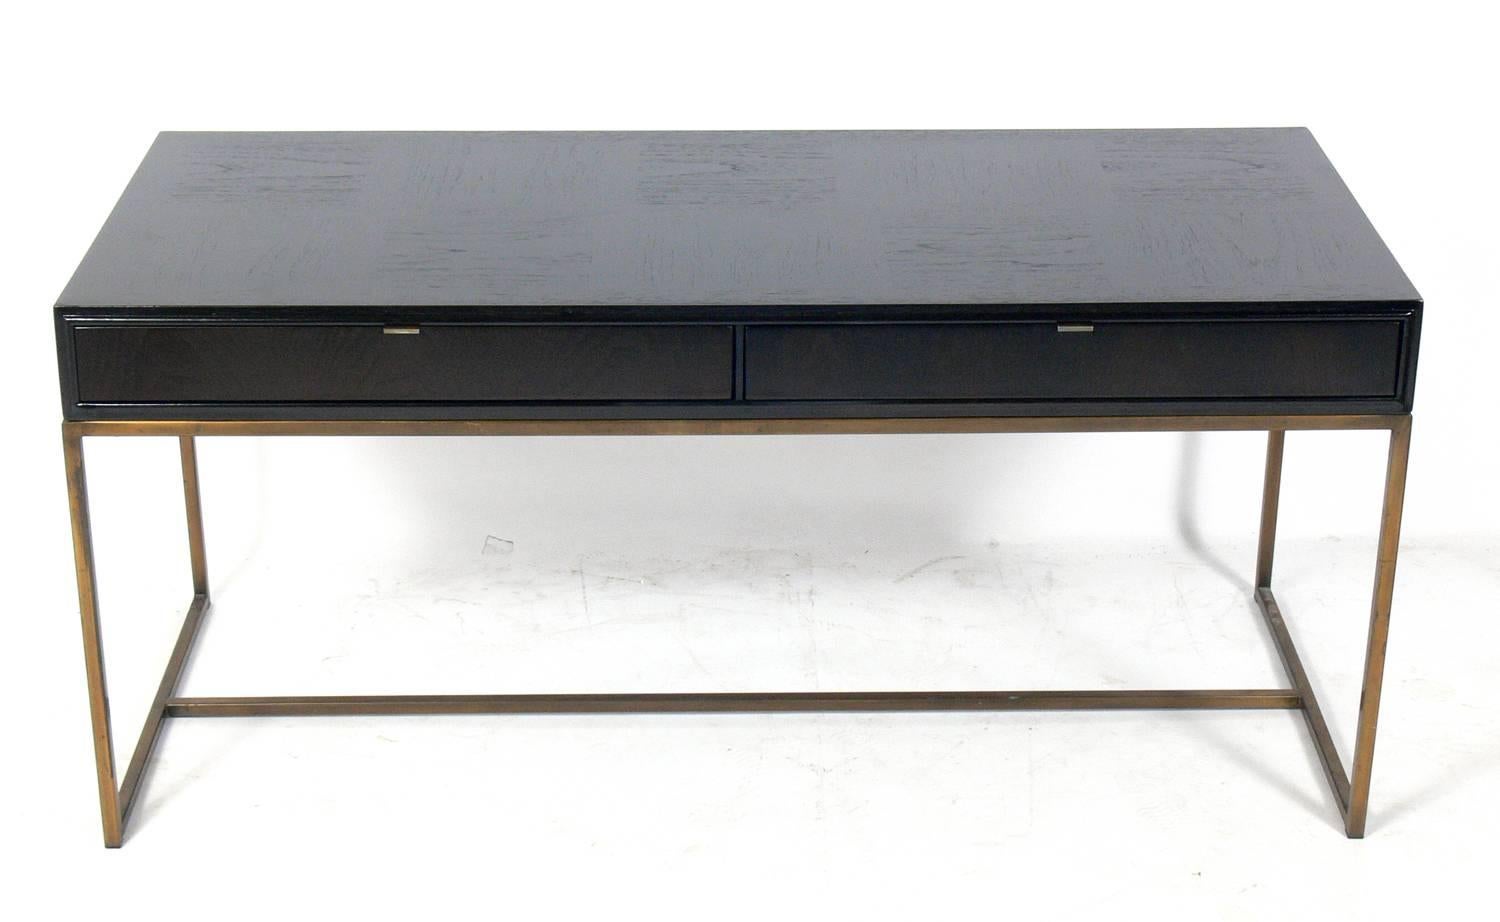 Clean lined Mid-Century Modern desk, American, circa 1960s. It has been refinished in an ultra deep brown color lacquer. The brass color metal base and hardware retain their warm original patina. It is a versatile size and can be used as a desk,